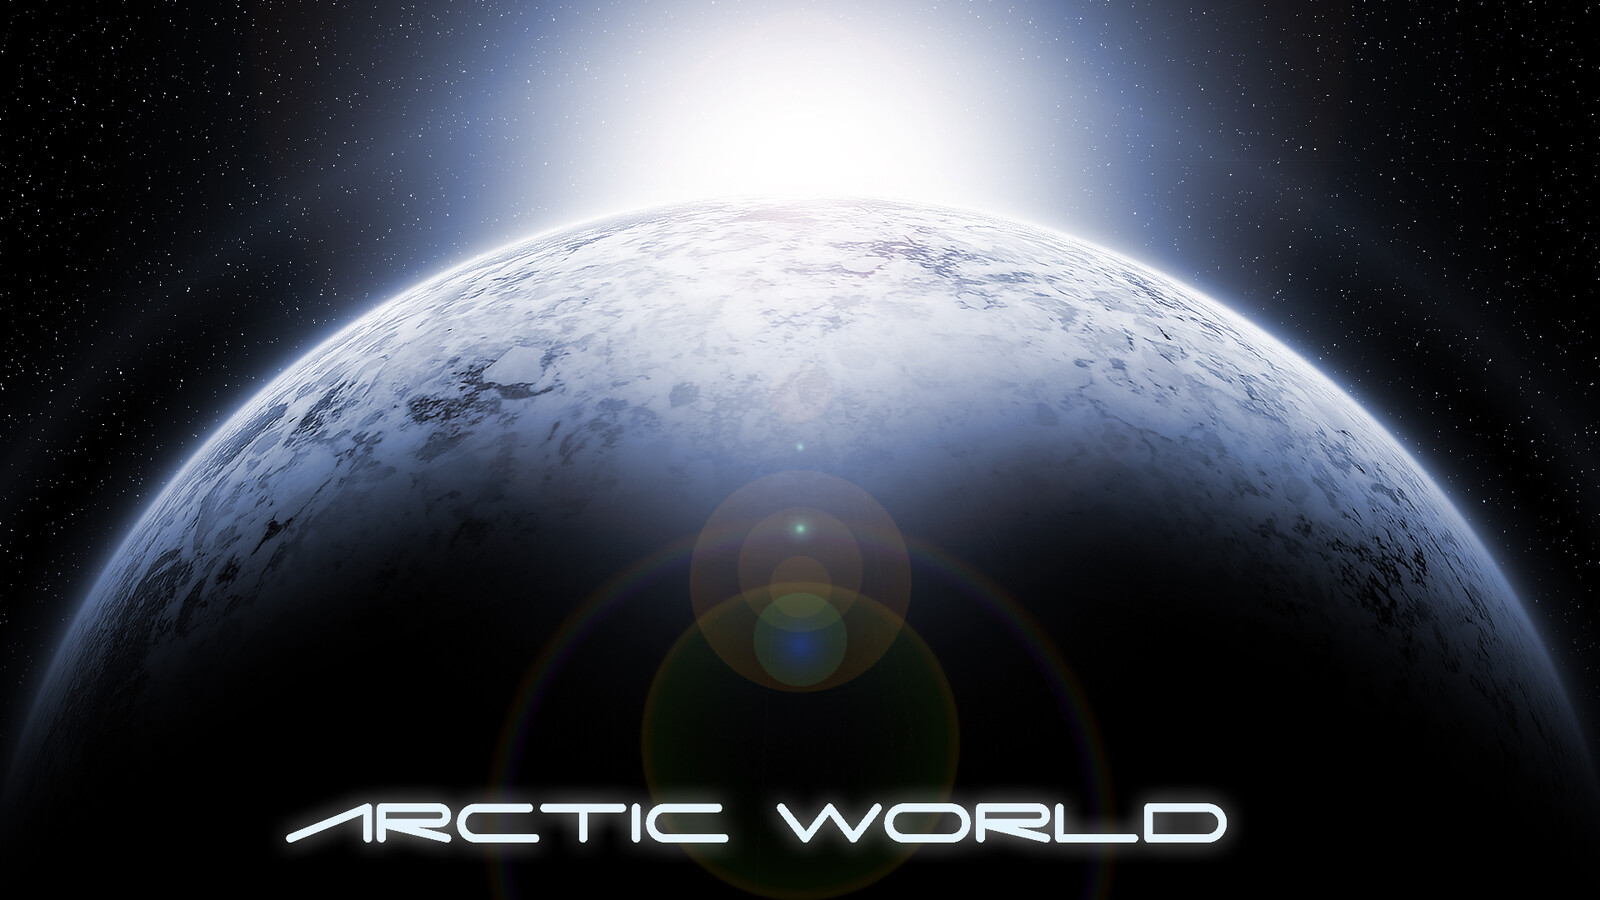 Artic planet concept. I'm still adding to this class project. Here is the opening shot.